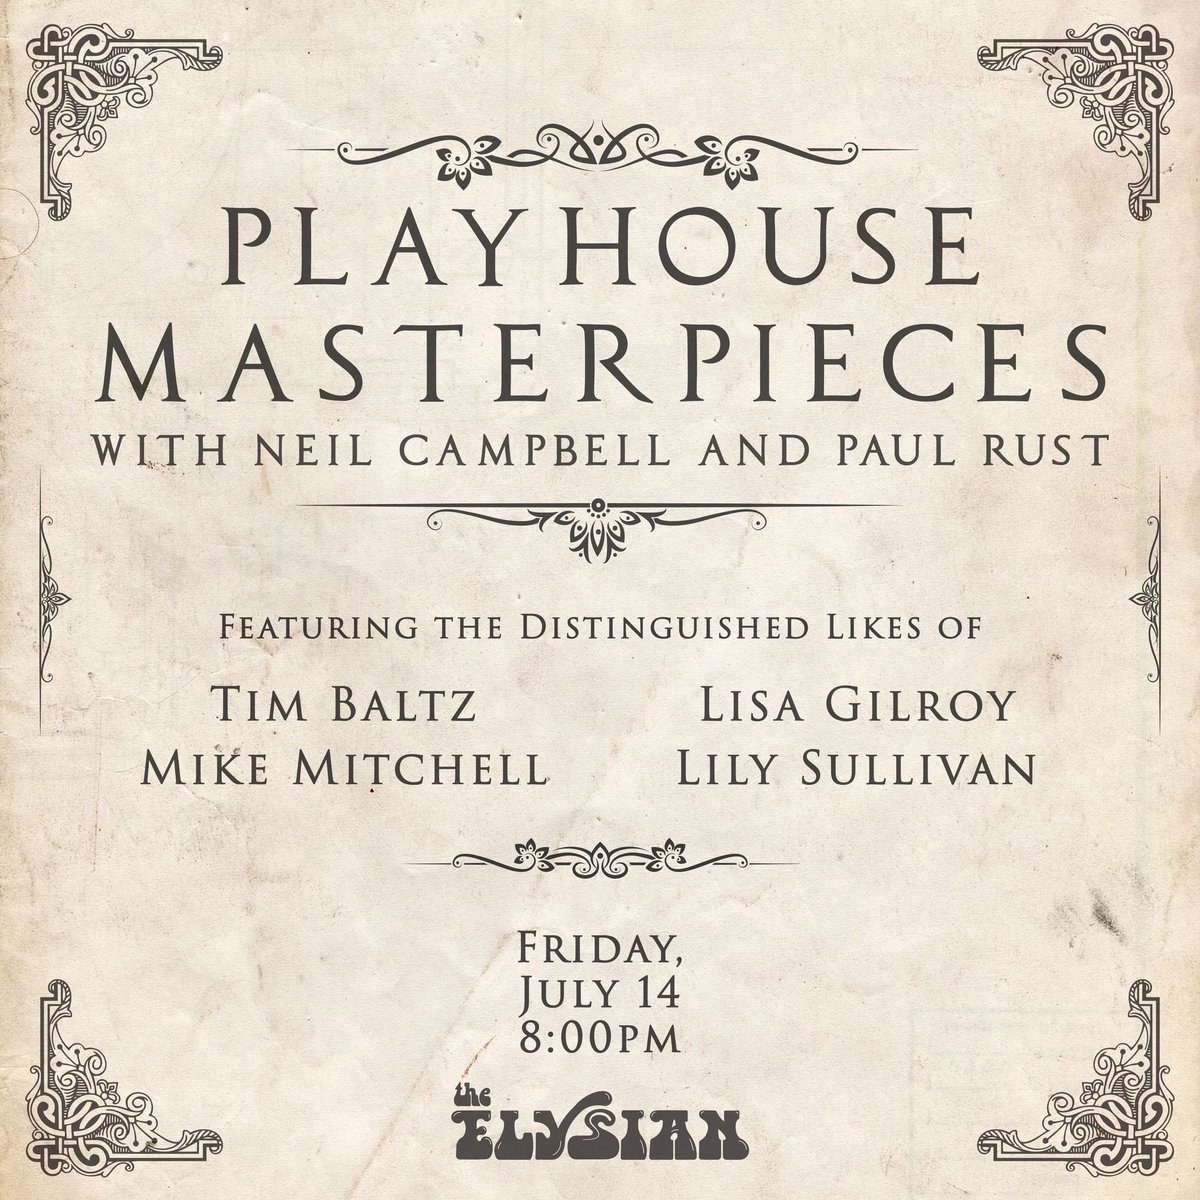 Next Friday JULY 14TH at The @ElysianTheater! Join us for an evening of PLAYHOUSE MASTERPIECES with @Neilerdude and me! Featuring the distinguished likes of: @Tim_Baltz @TheLisaGilroy @BDayBoysMitch @LilyYily Tickets! shorturl.at/glyJK